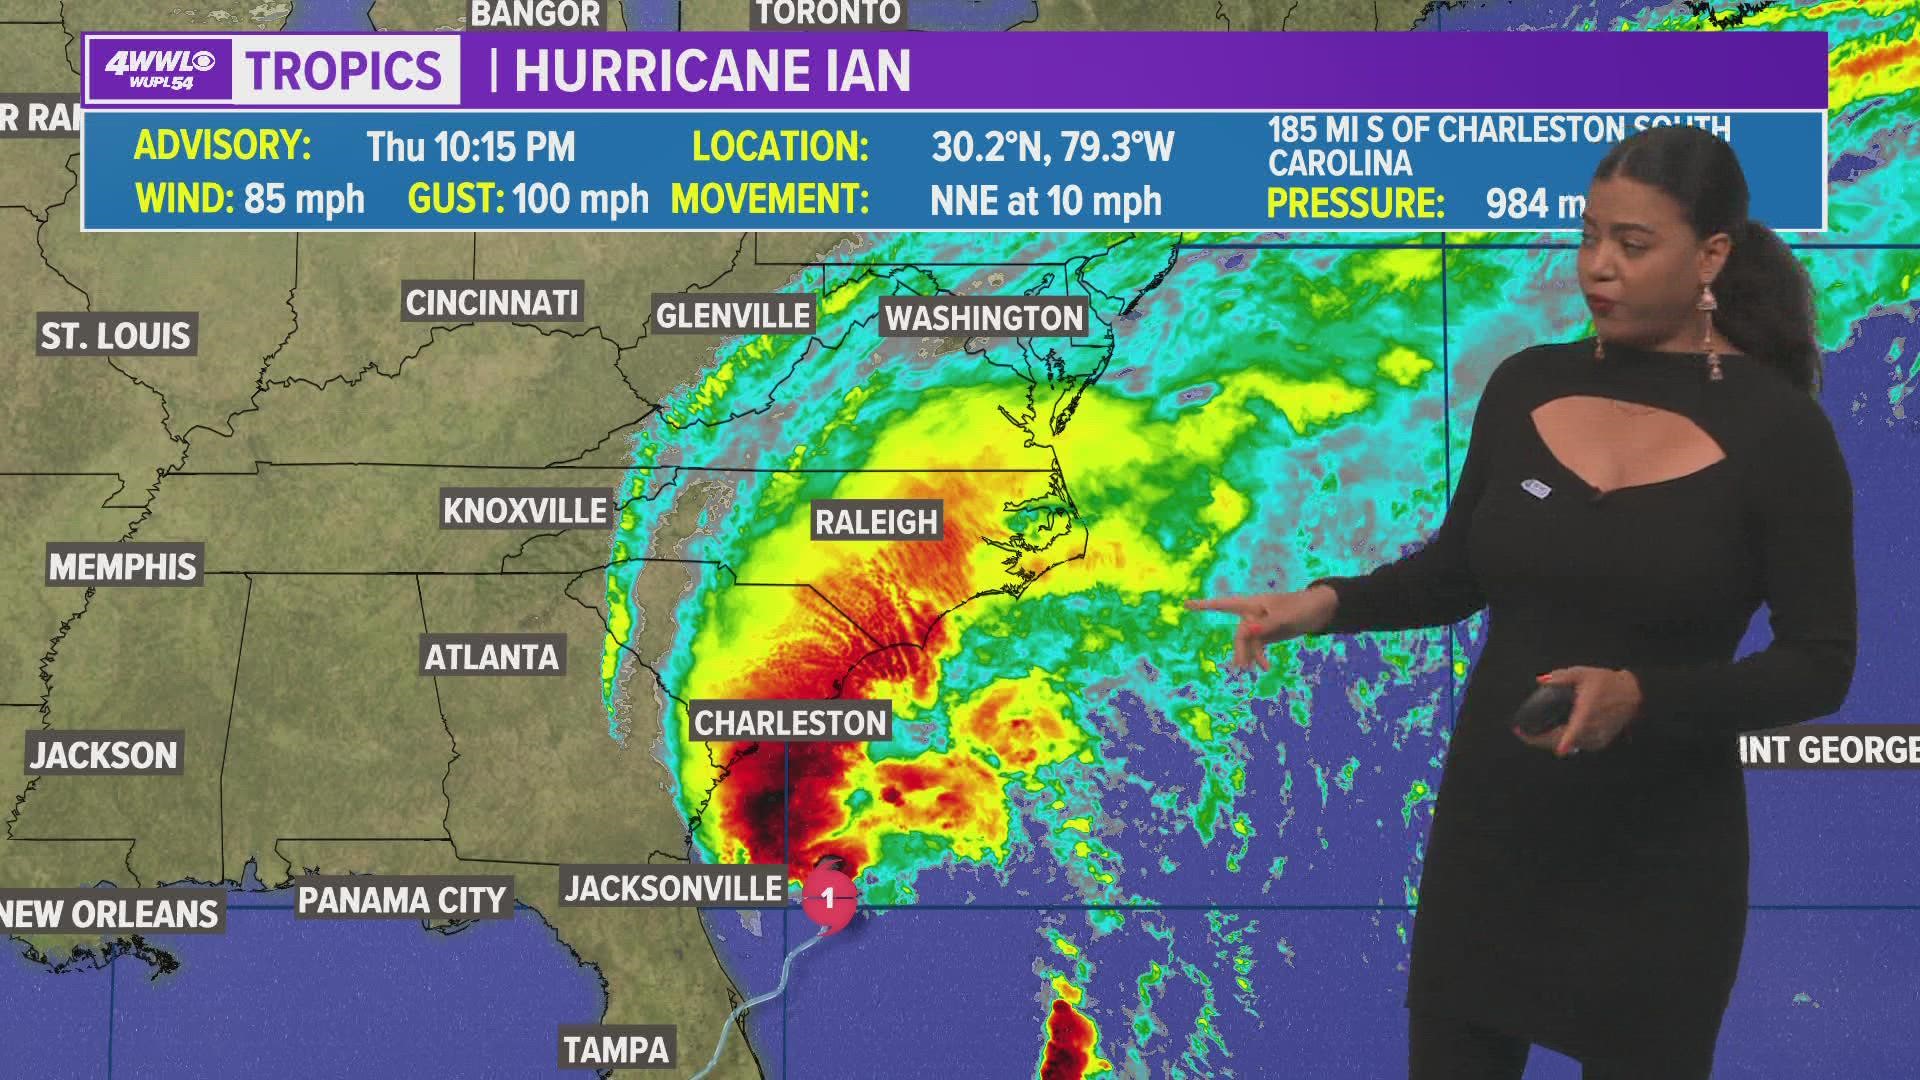 Hurricane Ian has re-formed and is taking aim on the Carolinas after devastating Florida.